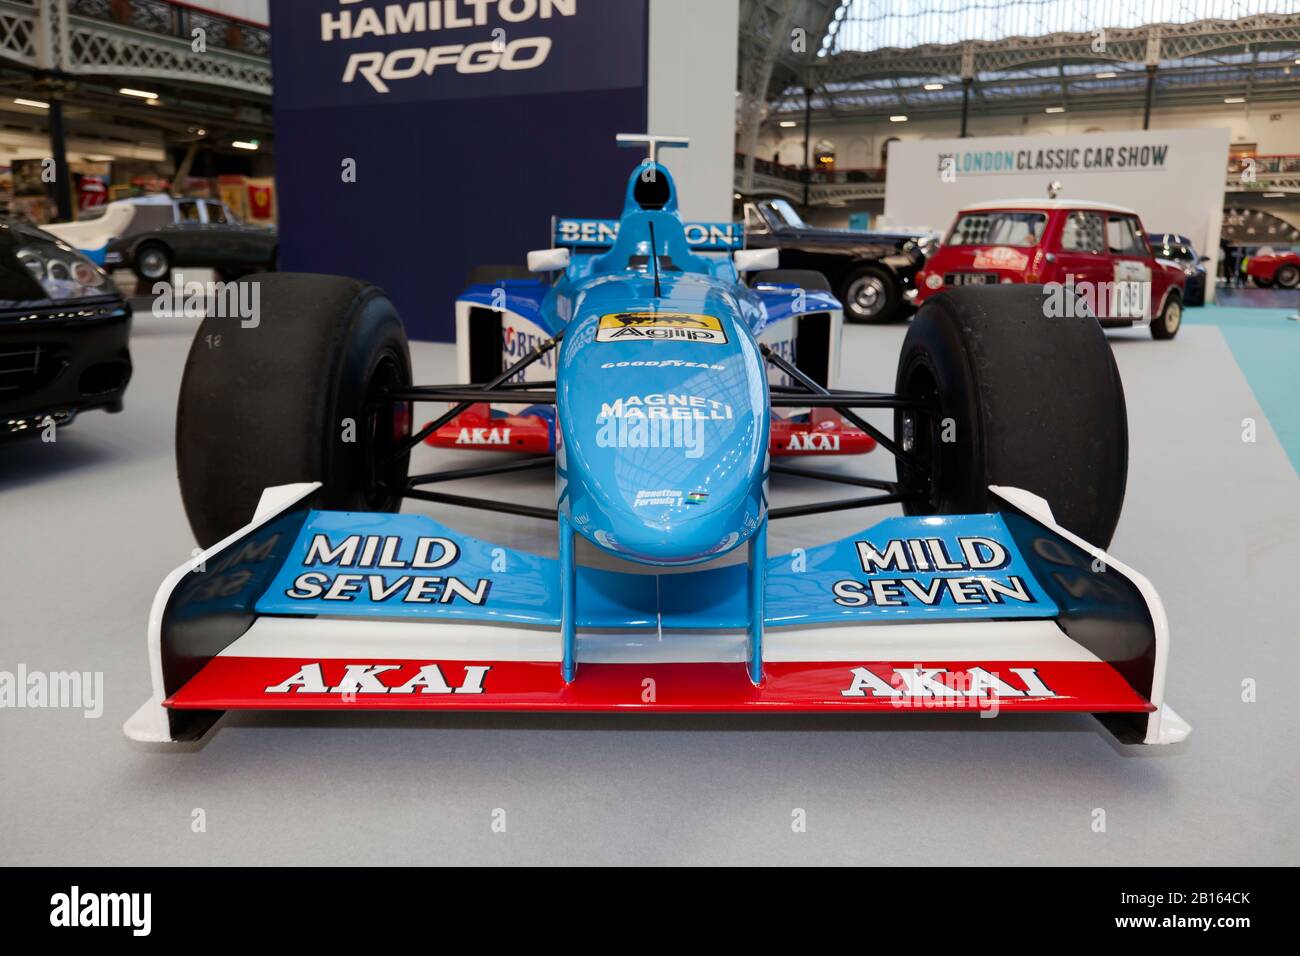 Three Quarter Front View Of 1998 Benetton B198 Formula One Car Ex Giancarlo Fisichella At The London Classic Car Show Stock Photo Alamy